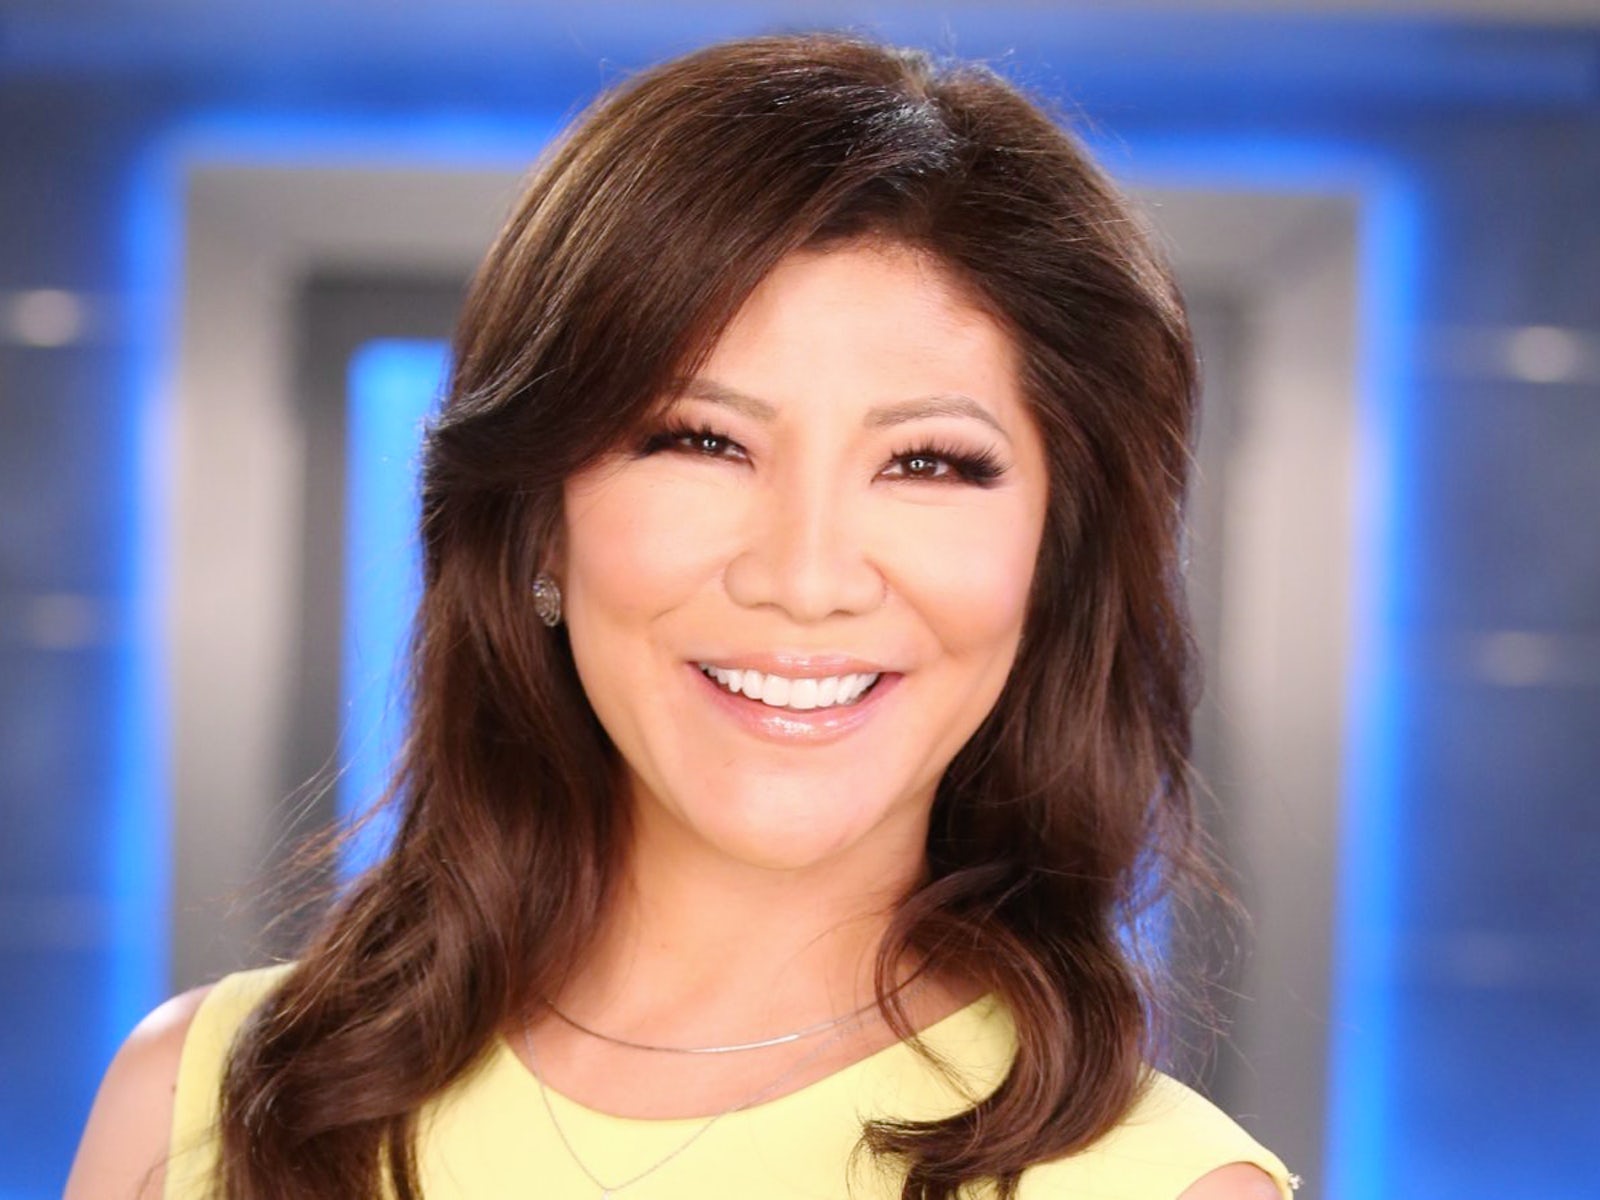 'Big Brother' Season 22 may reportedly be a cast of former 'Big Brother